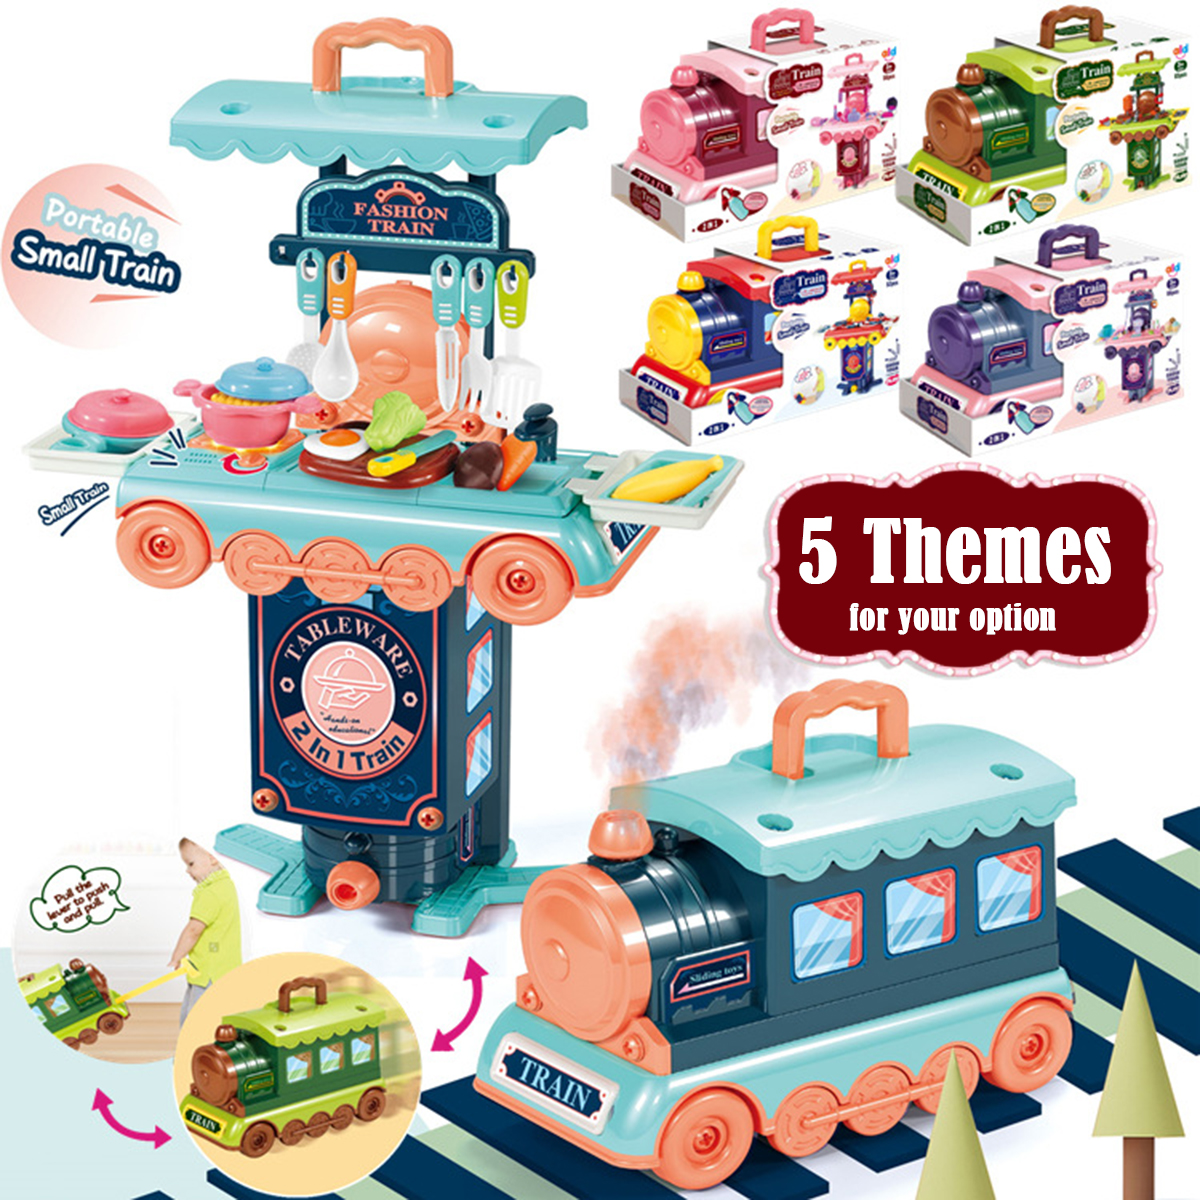 2-IN-1-Multi-style-Kitchen-Cooking-Play-and-Portable-Small-Train-Learning-Set-Toys-for-Kids-Gift-1673927-1